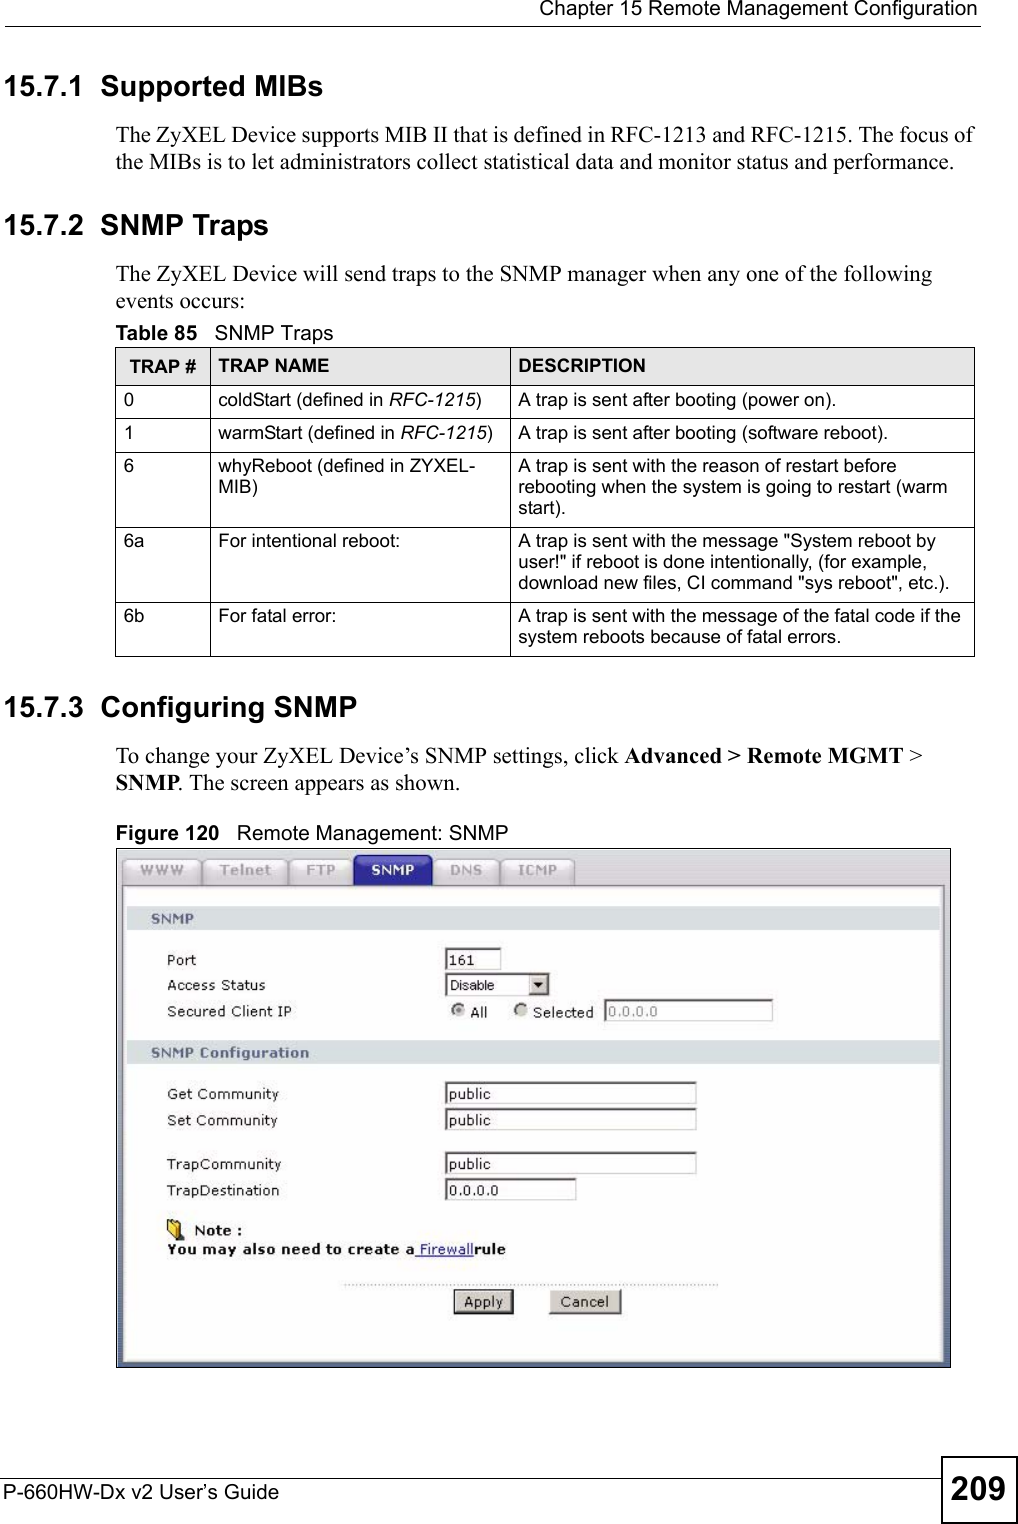  Chapter 15 Remote Management ConfigurationP-660HW-Dx v2 User’s Guide 20915.7.1  Supported MIBsThe ZyXEL Device supports MIB II that is defined in RFC-1213 and RFC-1215. The focus of the MIBs is to let administrators collect statistical data and monitor status and performance.15.7.2  SNMP Traps The ZyXEL Device will send traps to the SNMP manager when any one of the following events occurs:15.7.3  Configuring SNMPTo change your ZyXEL Device’s SNMP settings, click Advanced &gt; Remote MGMT &gt; SNMP. The screen appears as shown.Figure 120   Remote Management: SNMPTable 85   SNMP TrapsTRAP # TRAP NAME DESCRIPTION0coldStart (defined in RFC-1215)A trap is sent after booting (power on).1warmStart (defined in RFC-1215)A trap is sent after booting (software reboot).6whyReboot (defined in ZYXEL-MIB)A trap is sent with the reason of restart before rebooting when the system is going to restart (warm start).6a For intentional reboot: A trap is sent with the message &quot;System reboot by user!&quot; if reboot is done intentionally, (for example, download new files, CI command &quot;sys reboot&quot;, etc.).6b For fatal error:  A trap is sent with the message of the fatal code if the system reboots because of fatal errors.